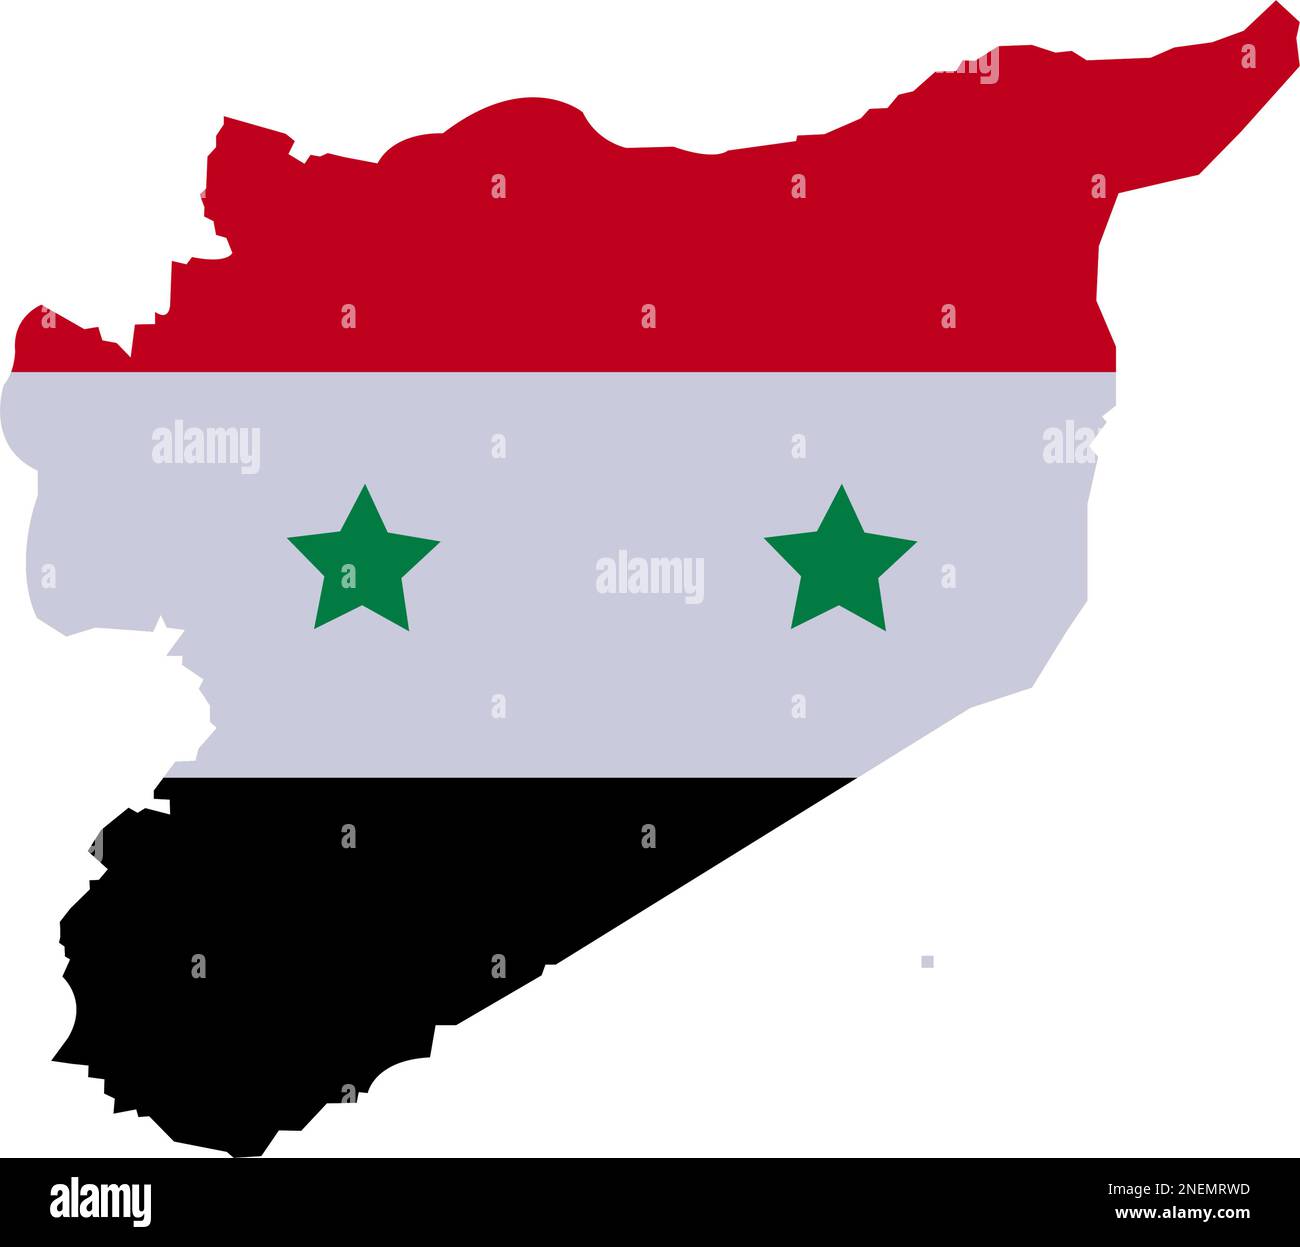 Syria Map with High detailed. Map of Syria filled with national flag symbols Syrian provinces. Syrian Map with Red white and blck three color and star Stock Vector